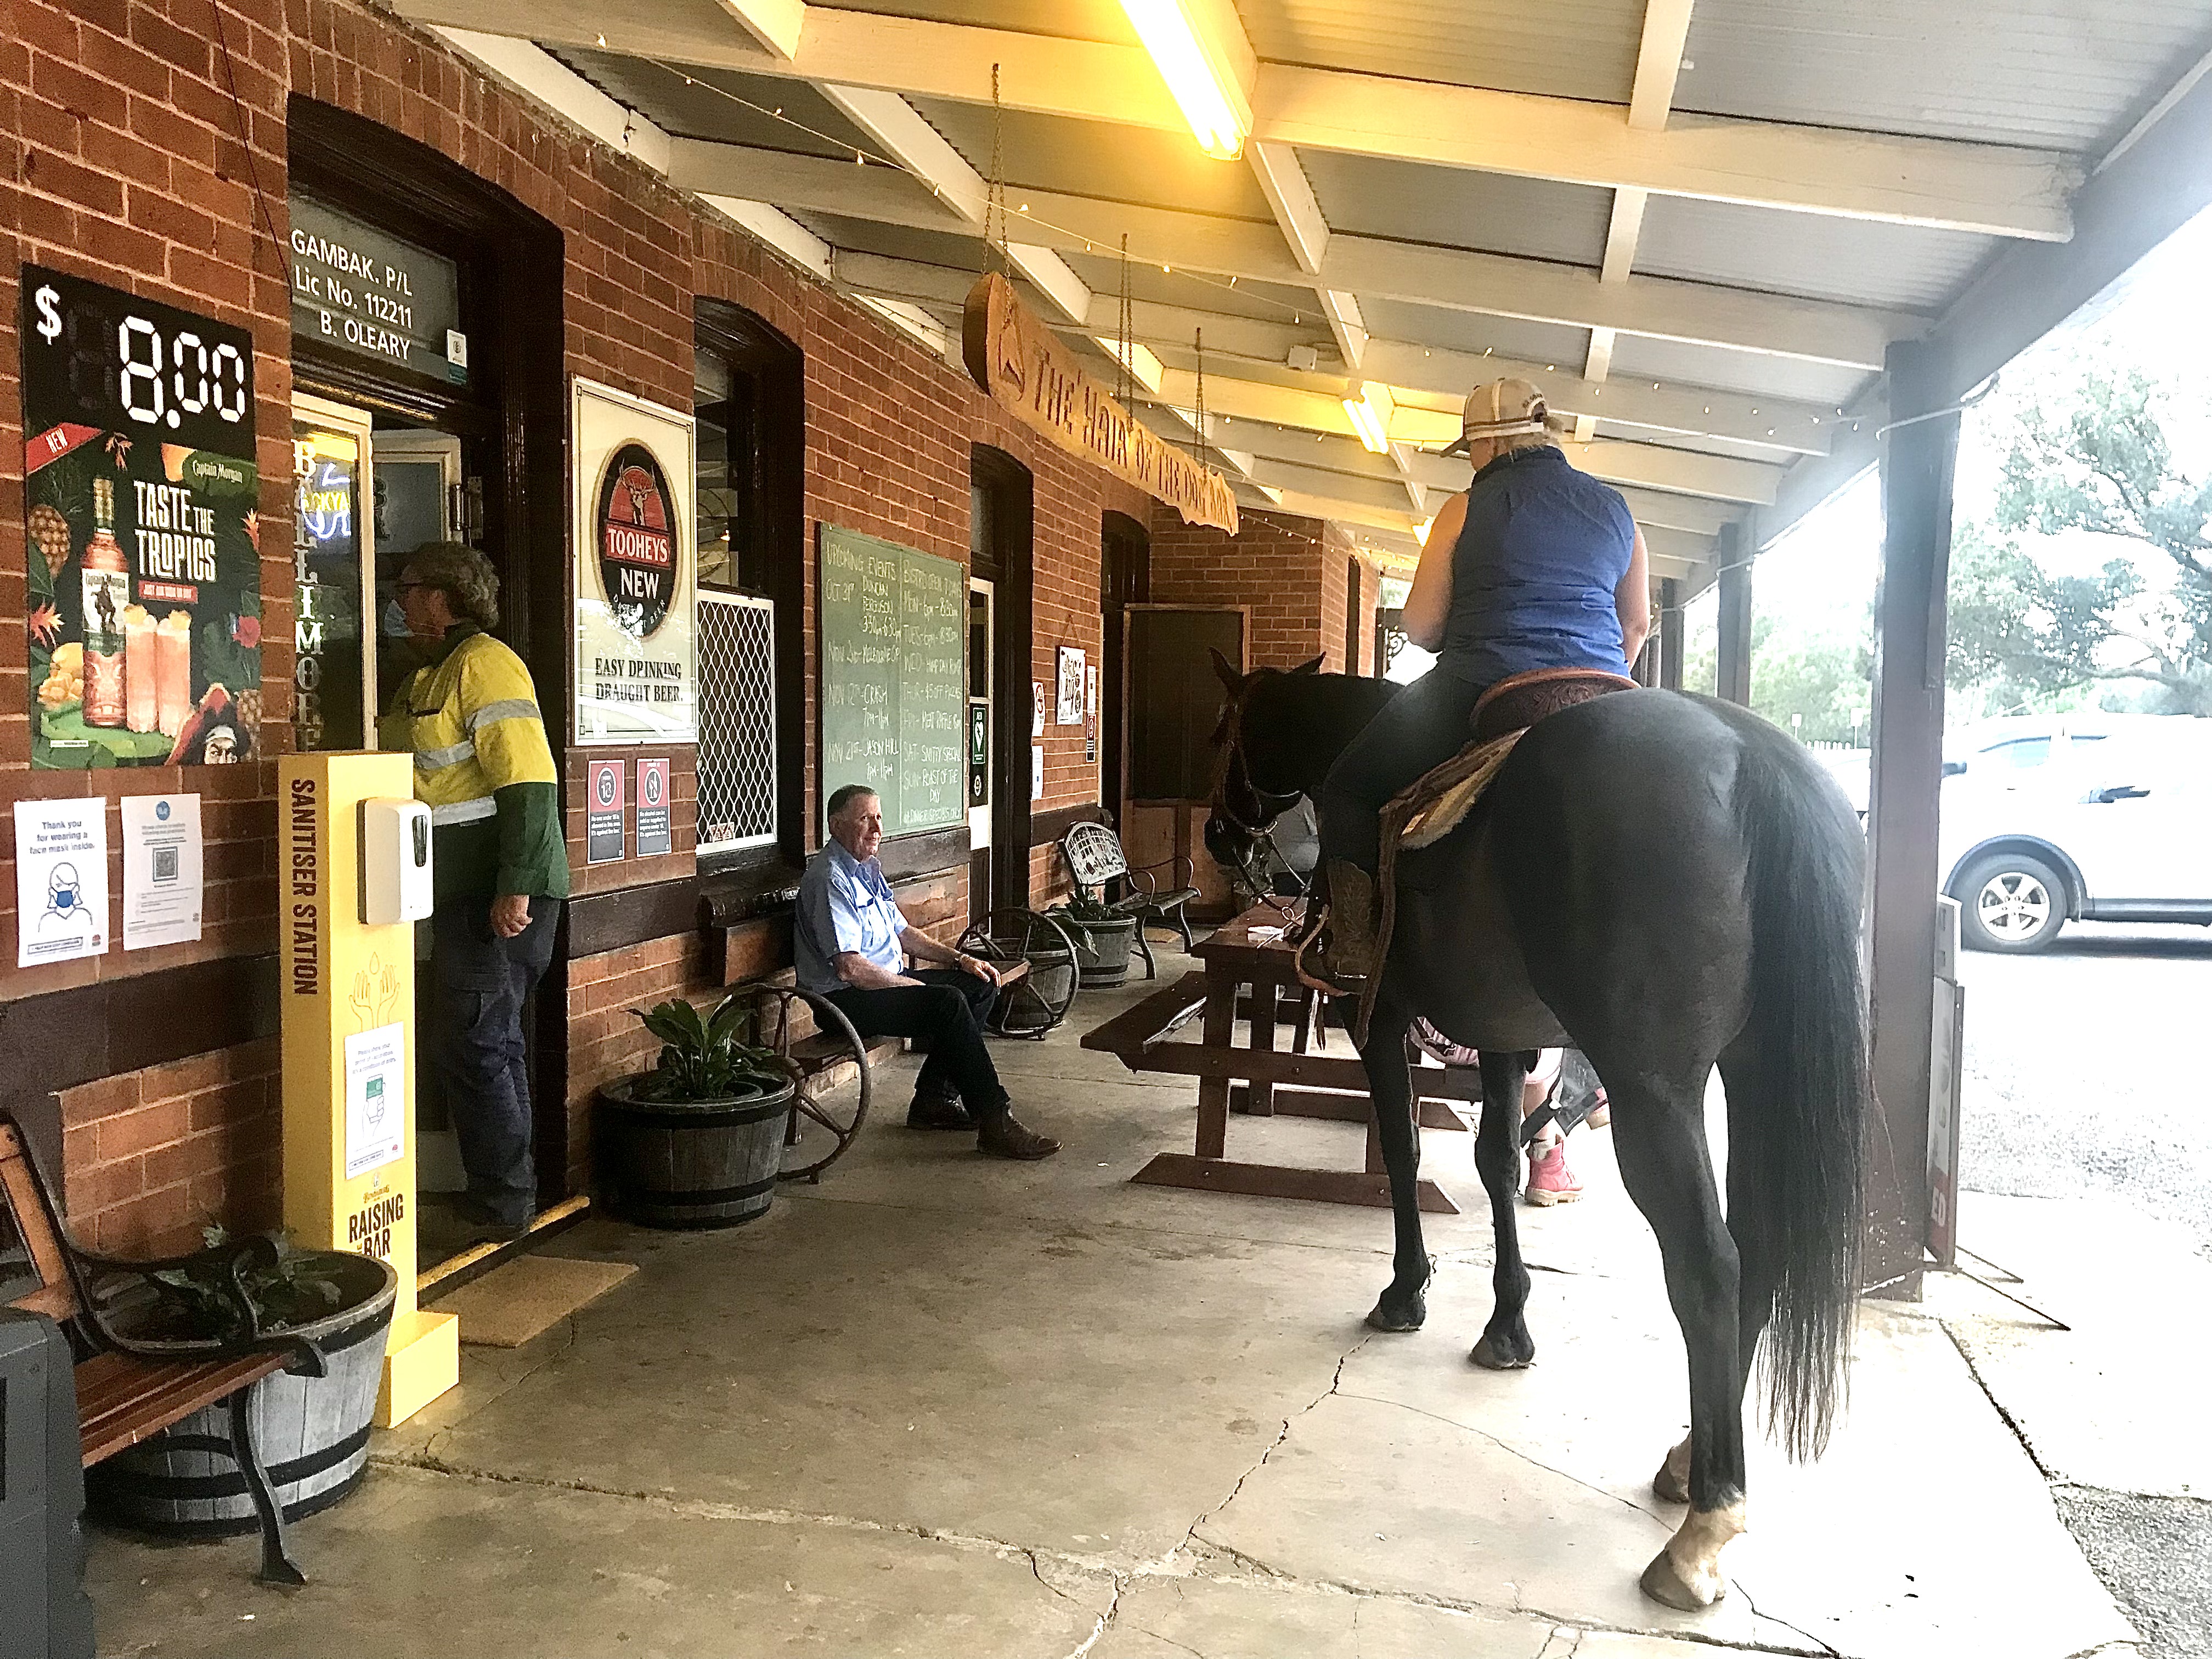 A horse and rider on the verandah of the Ballimore pub.